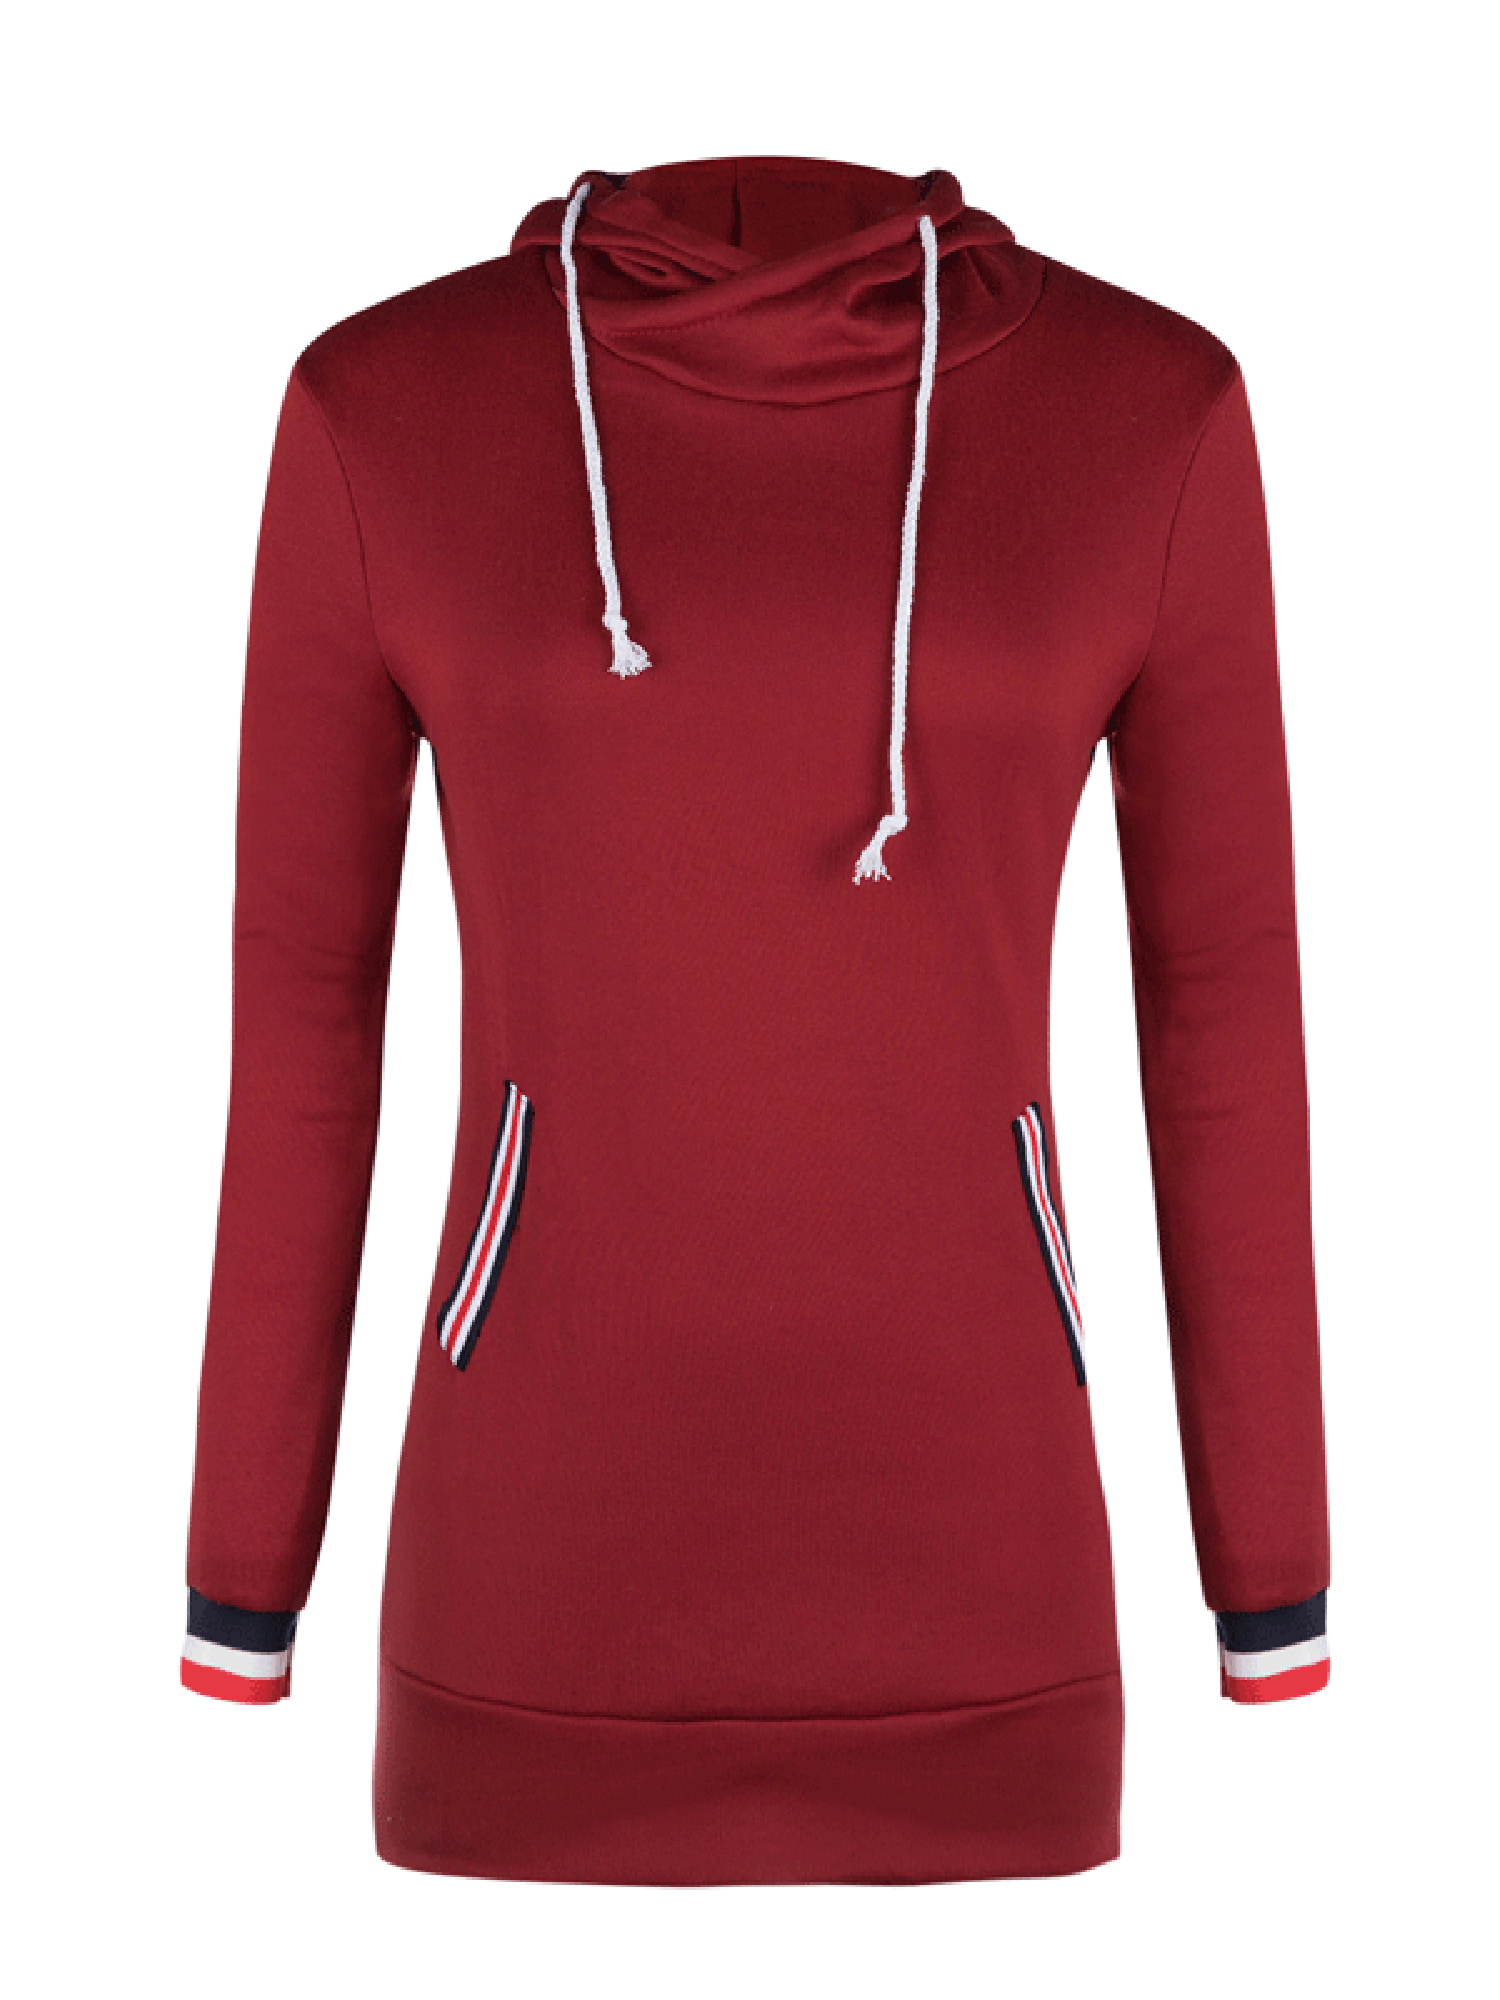 Womens Casual Long Sleeve Cowl Neck Sweatshirts T-Shirt Tops with Pockets